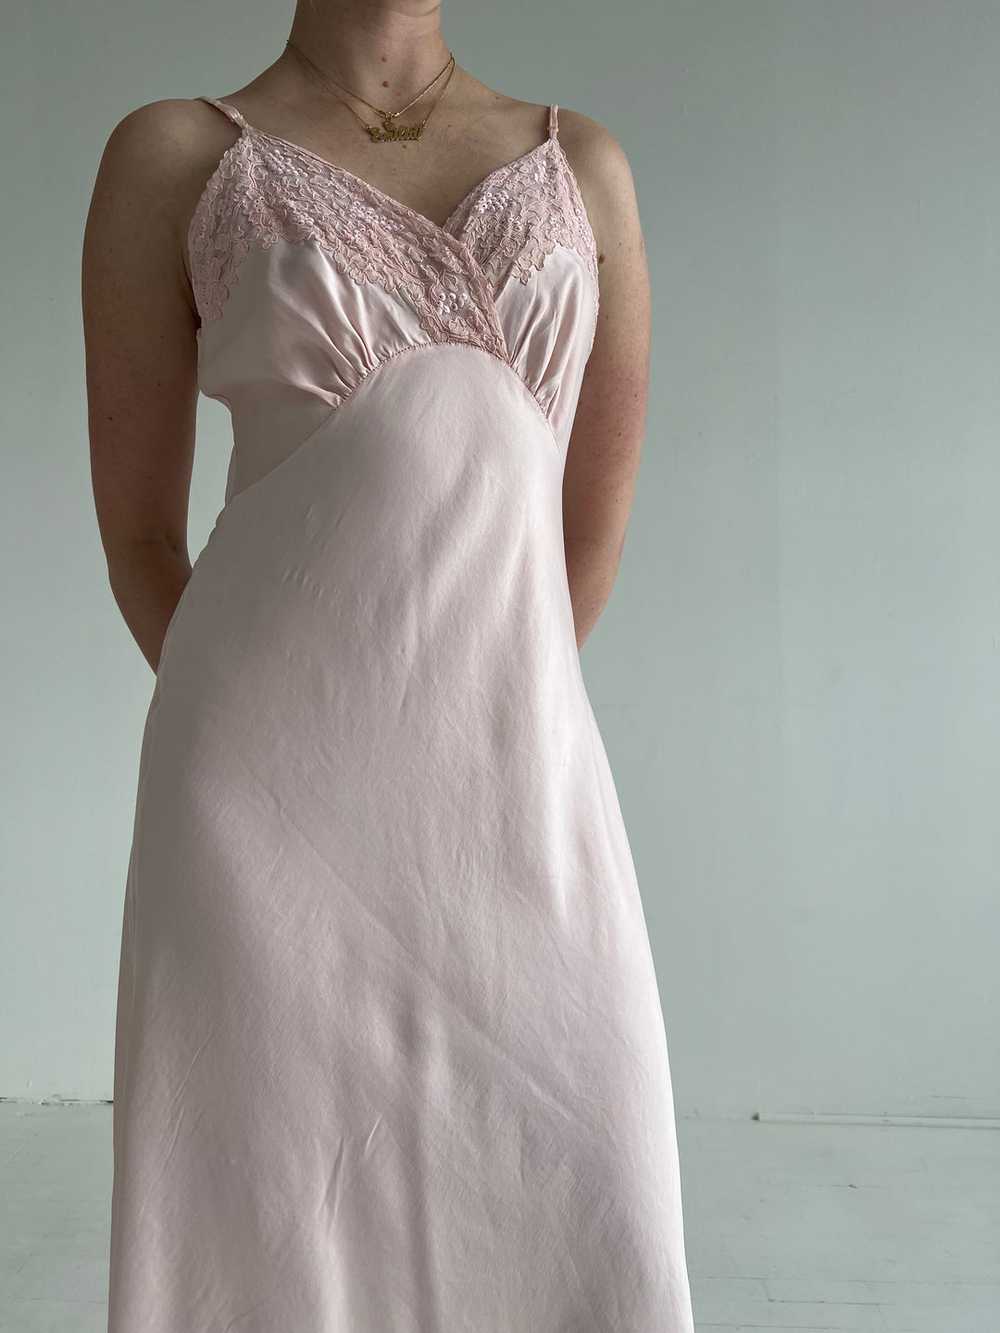 1930's Pink Silk Slip Dress with Embroidery - image 1